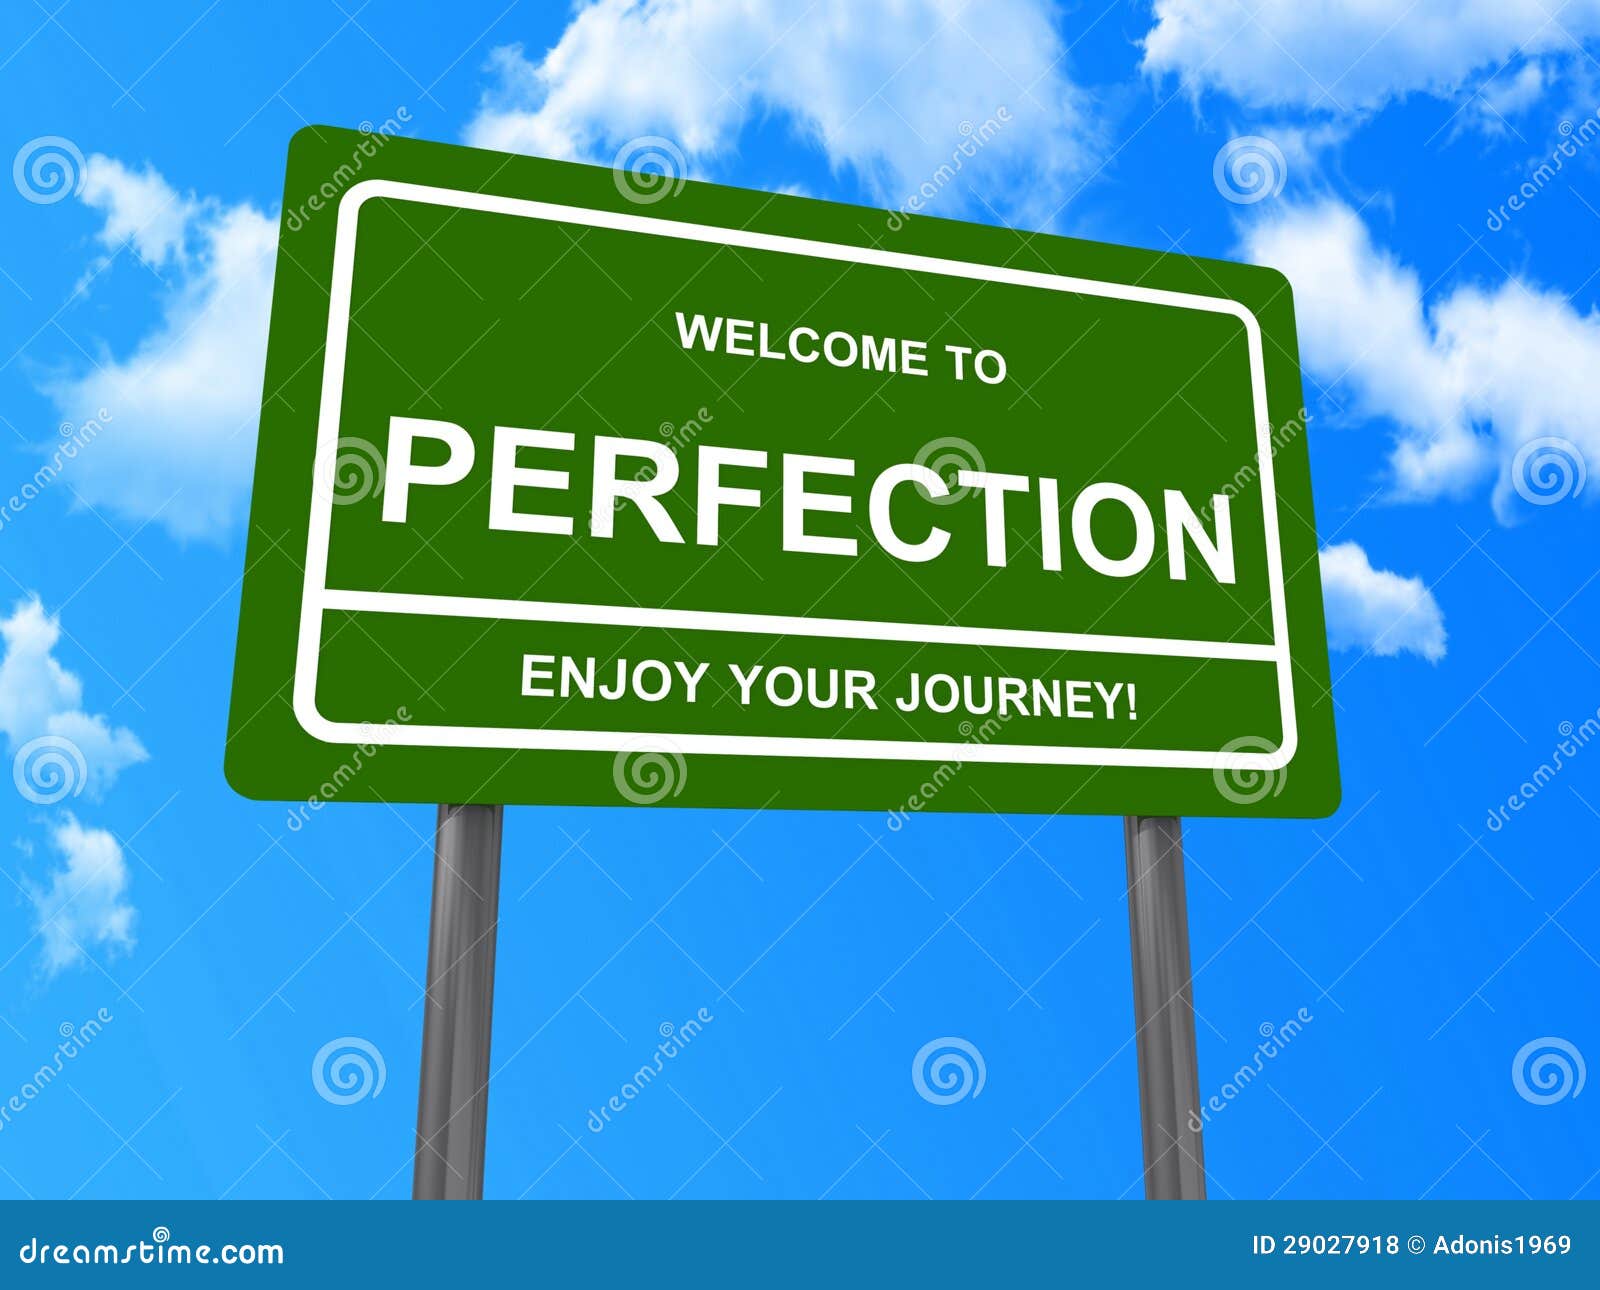 welcome to perfection sign